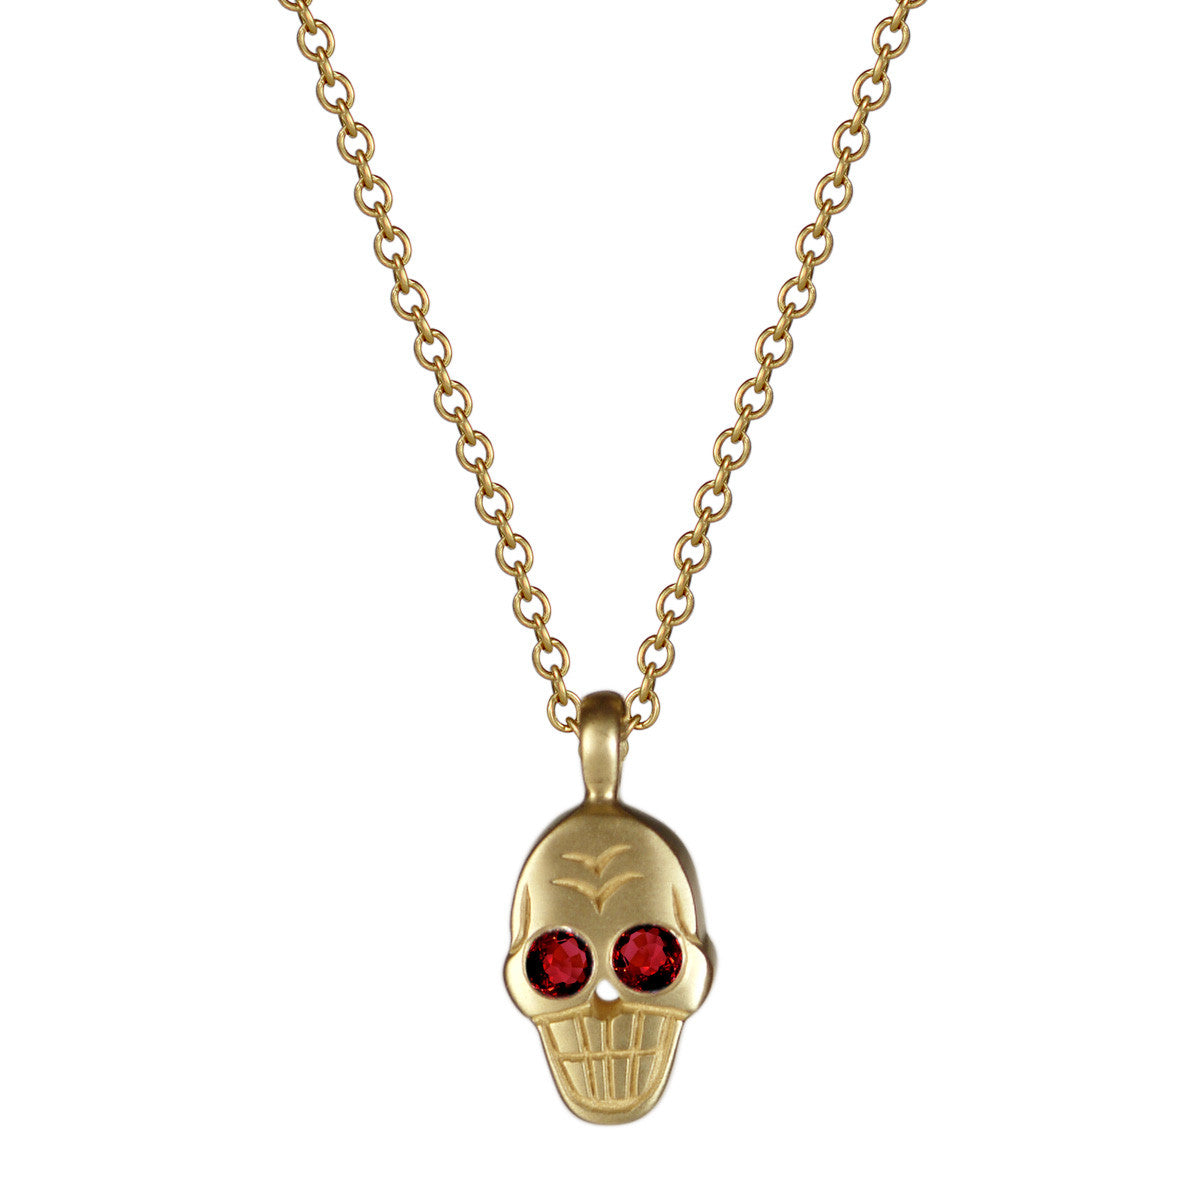 18K Gold Skull Pendant with Rubies